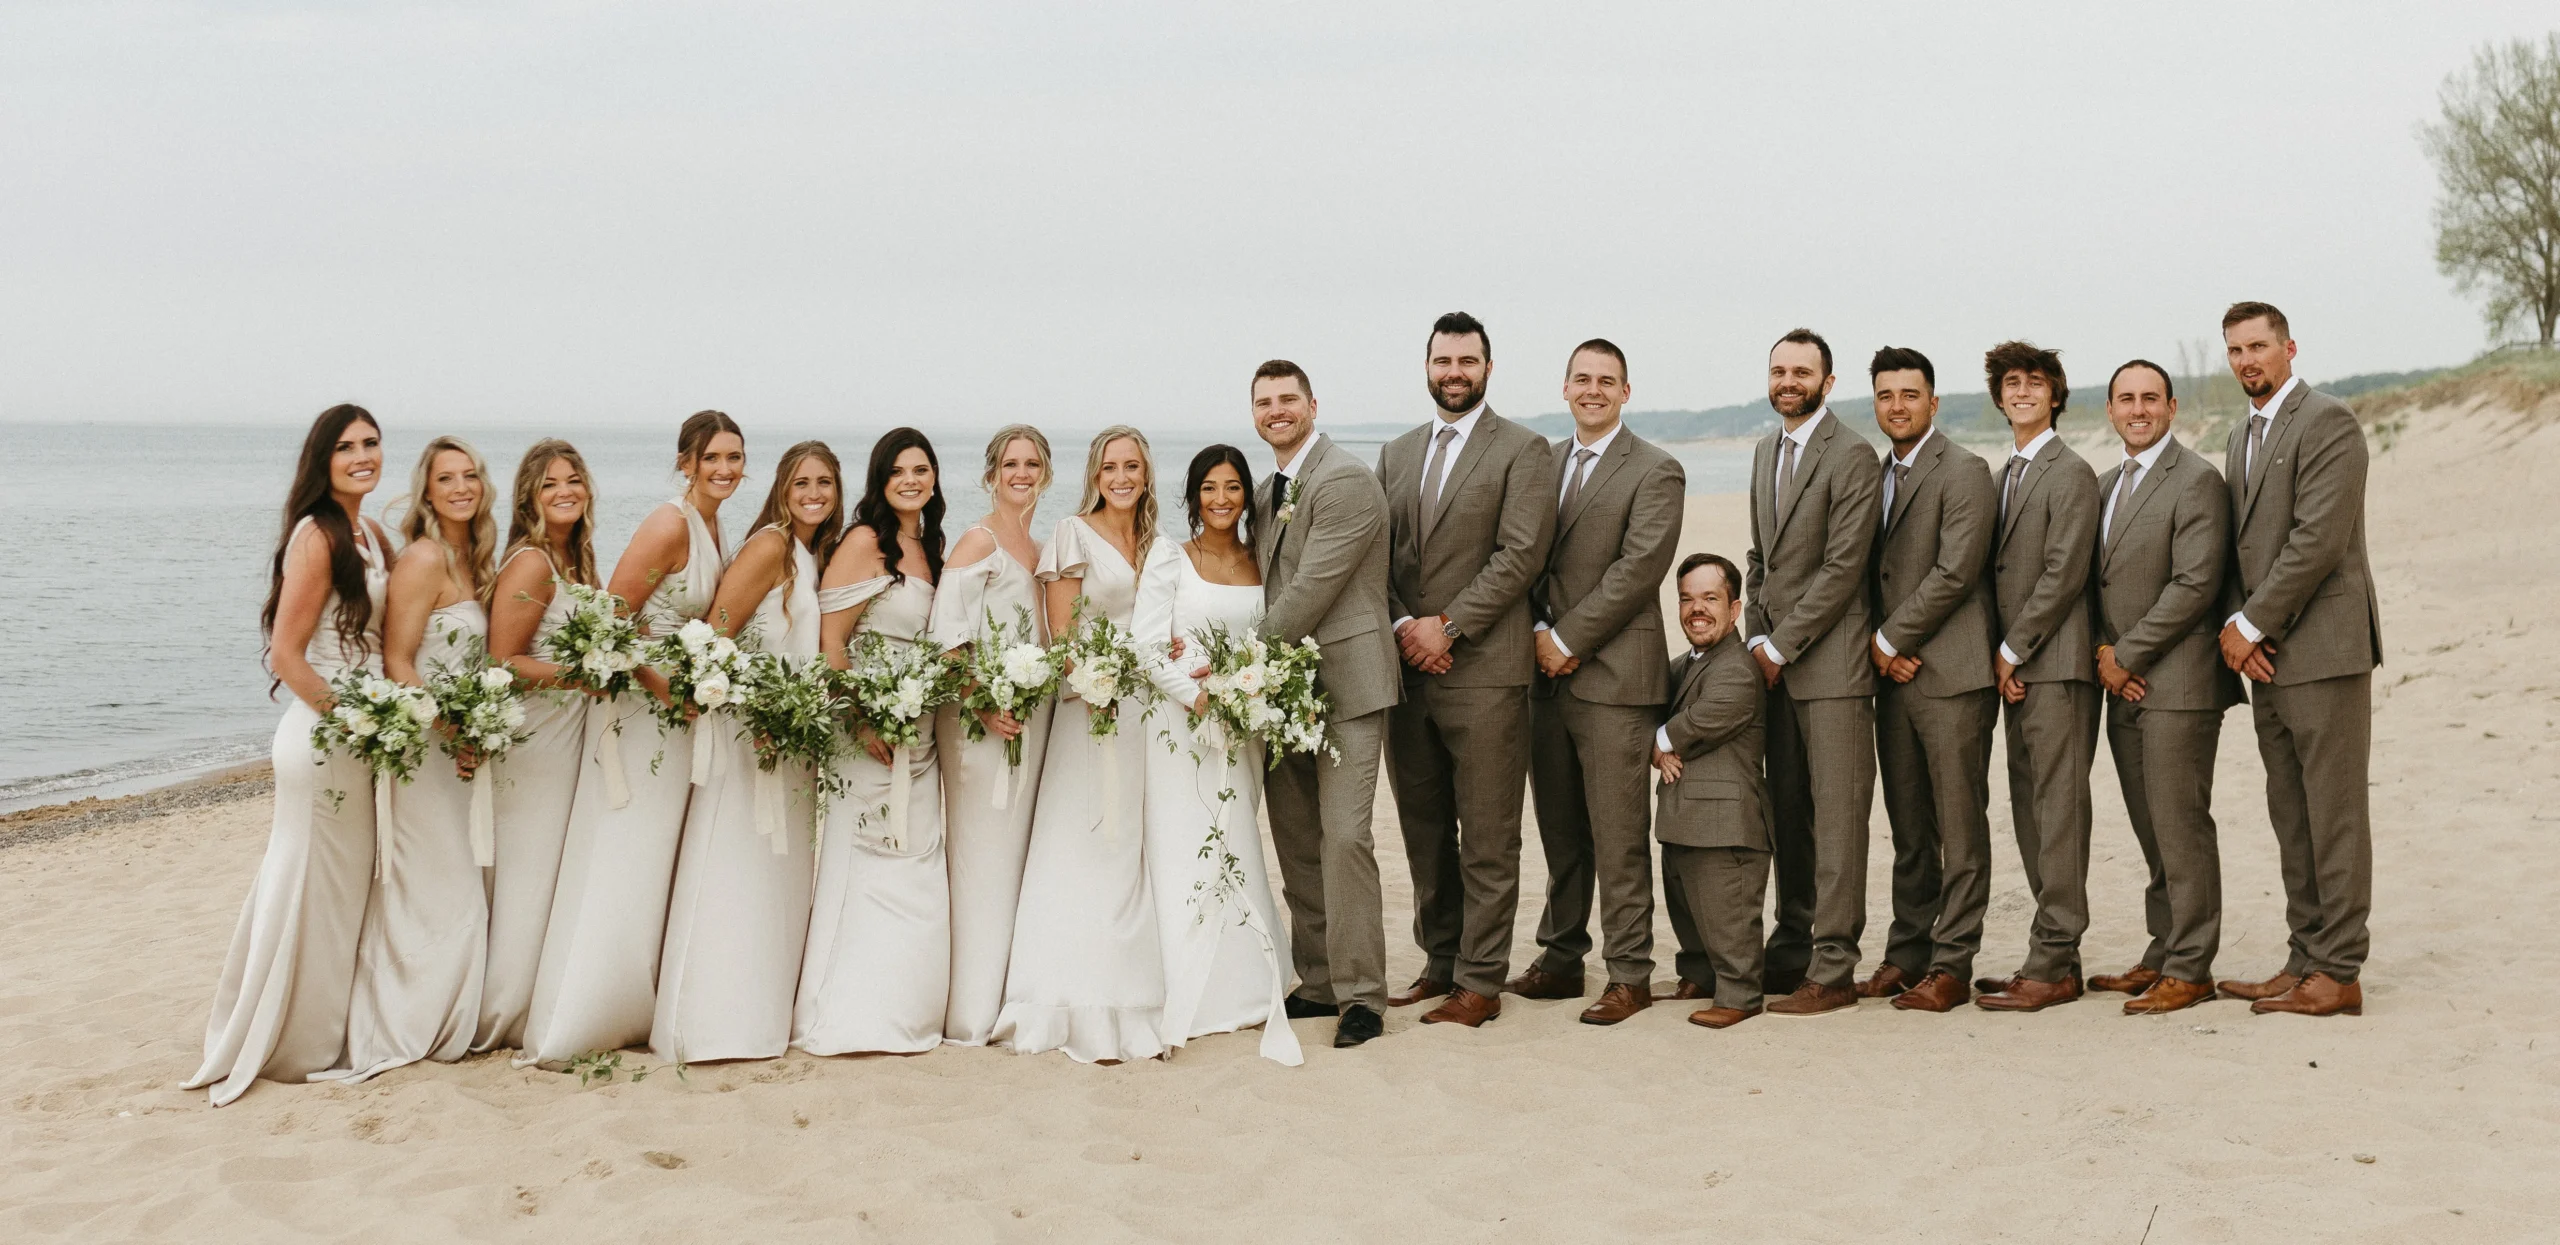 group photo on the beach with bride, groom, groomsmen, and bridesmaids